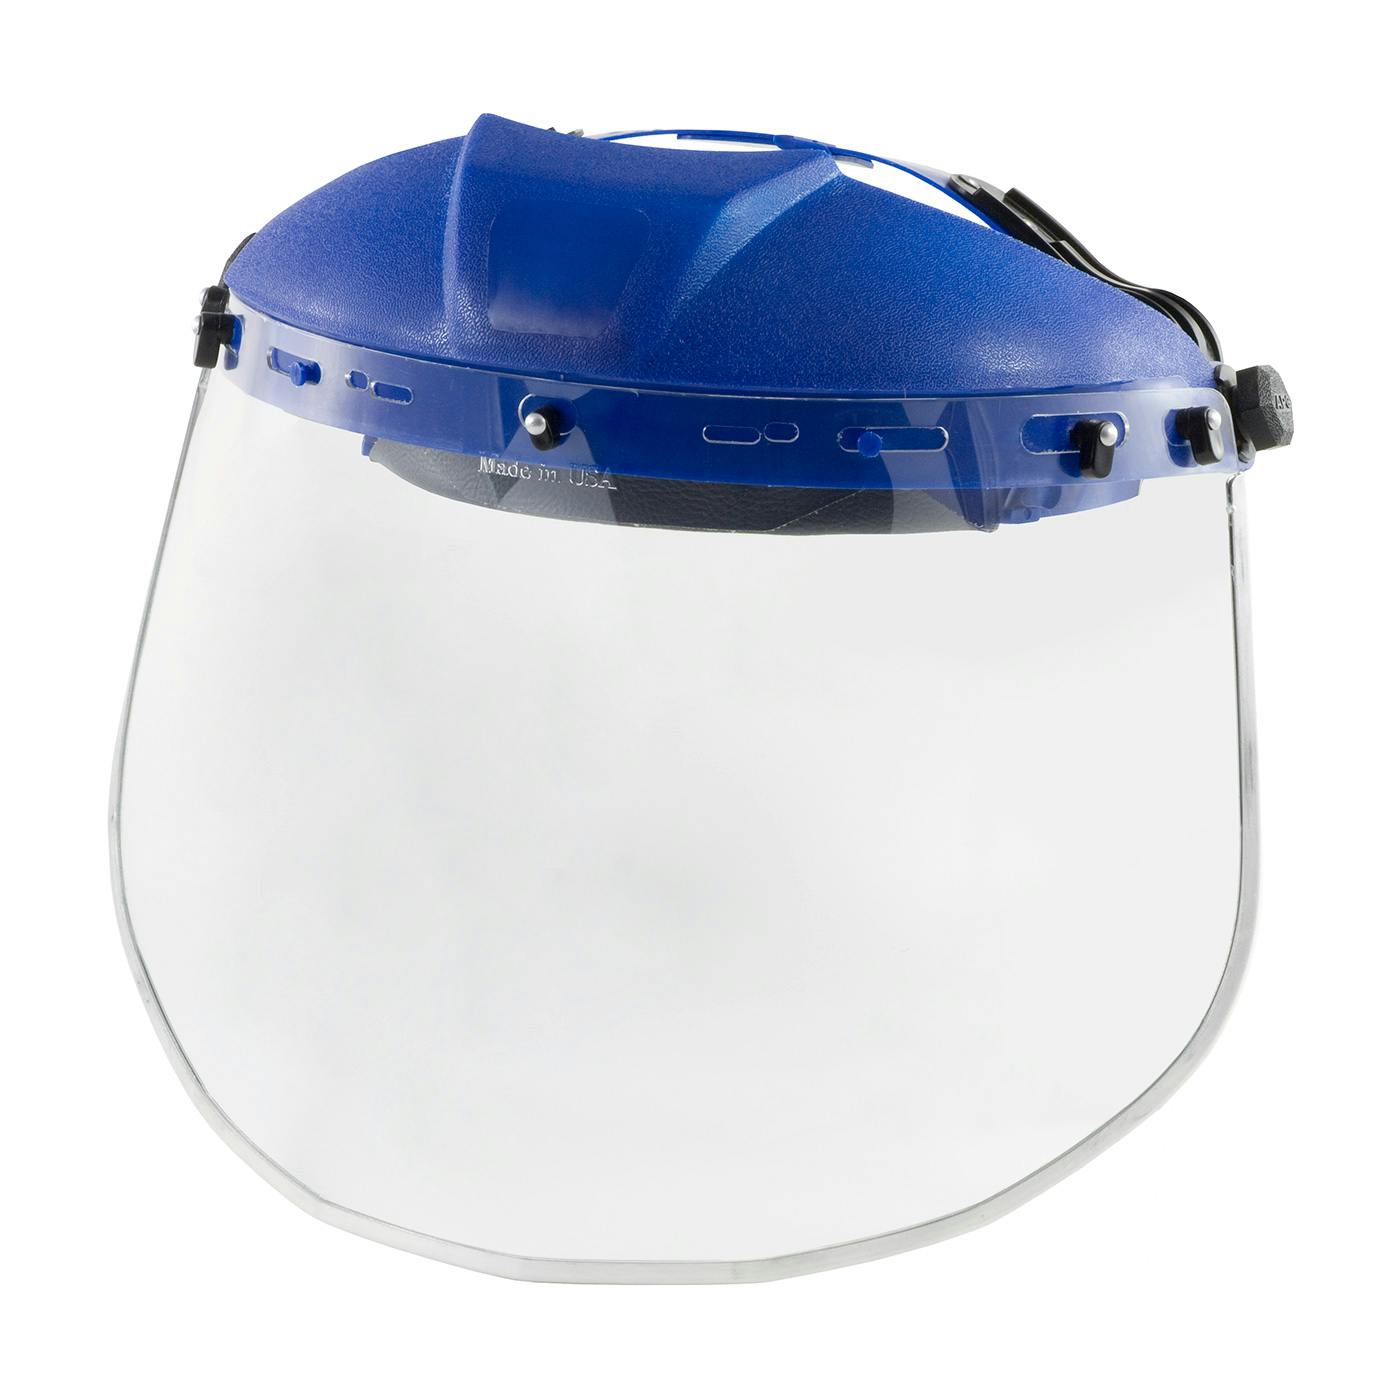 Clear Polycarbonate Safety Visor with Aluminum Binding - .040" Thickness, Clear (251-01-7204) - OS